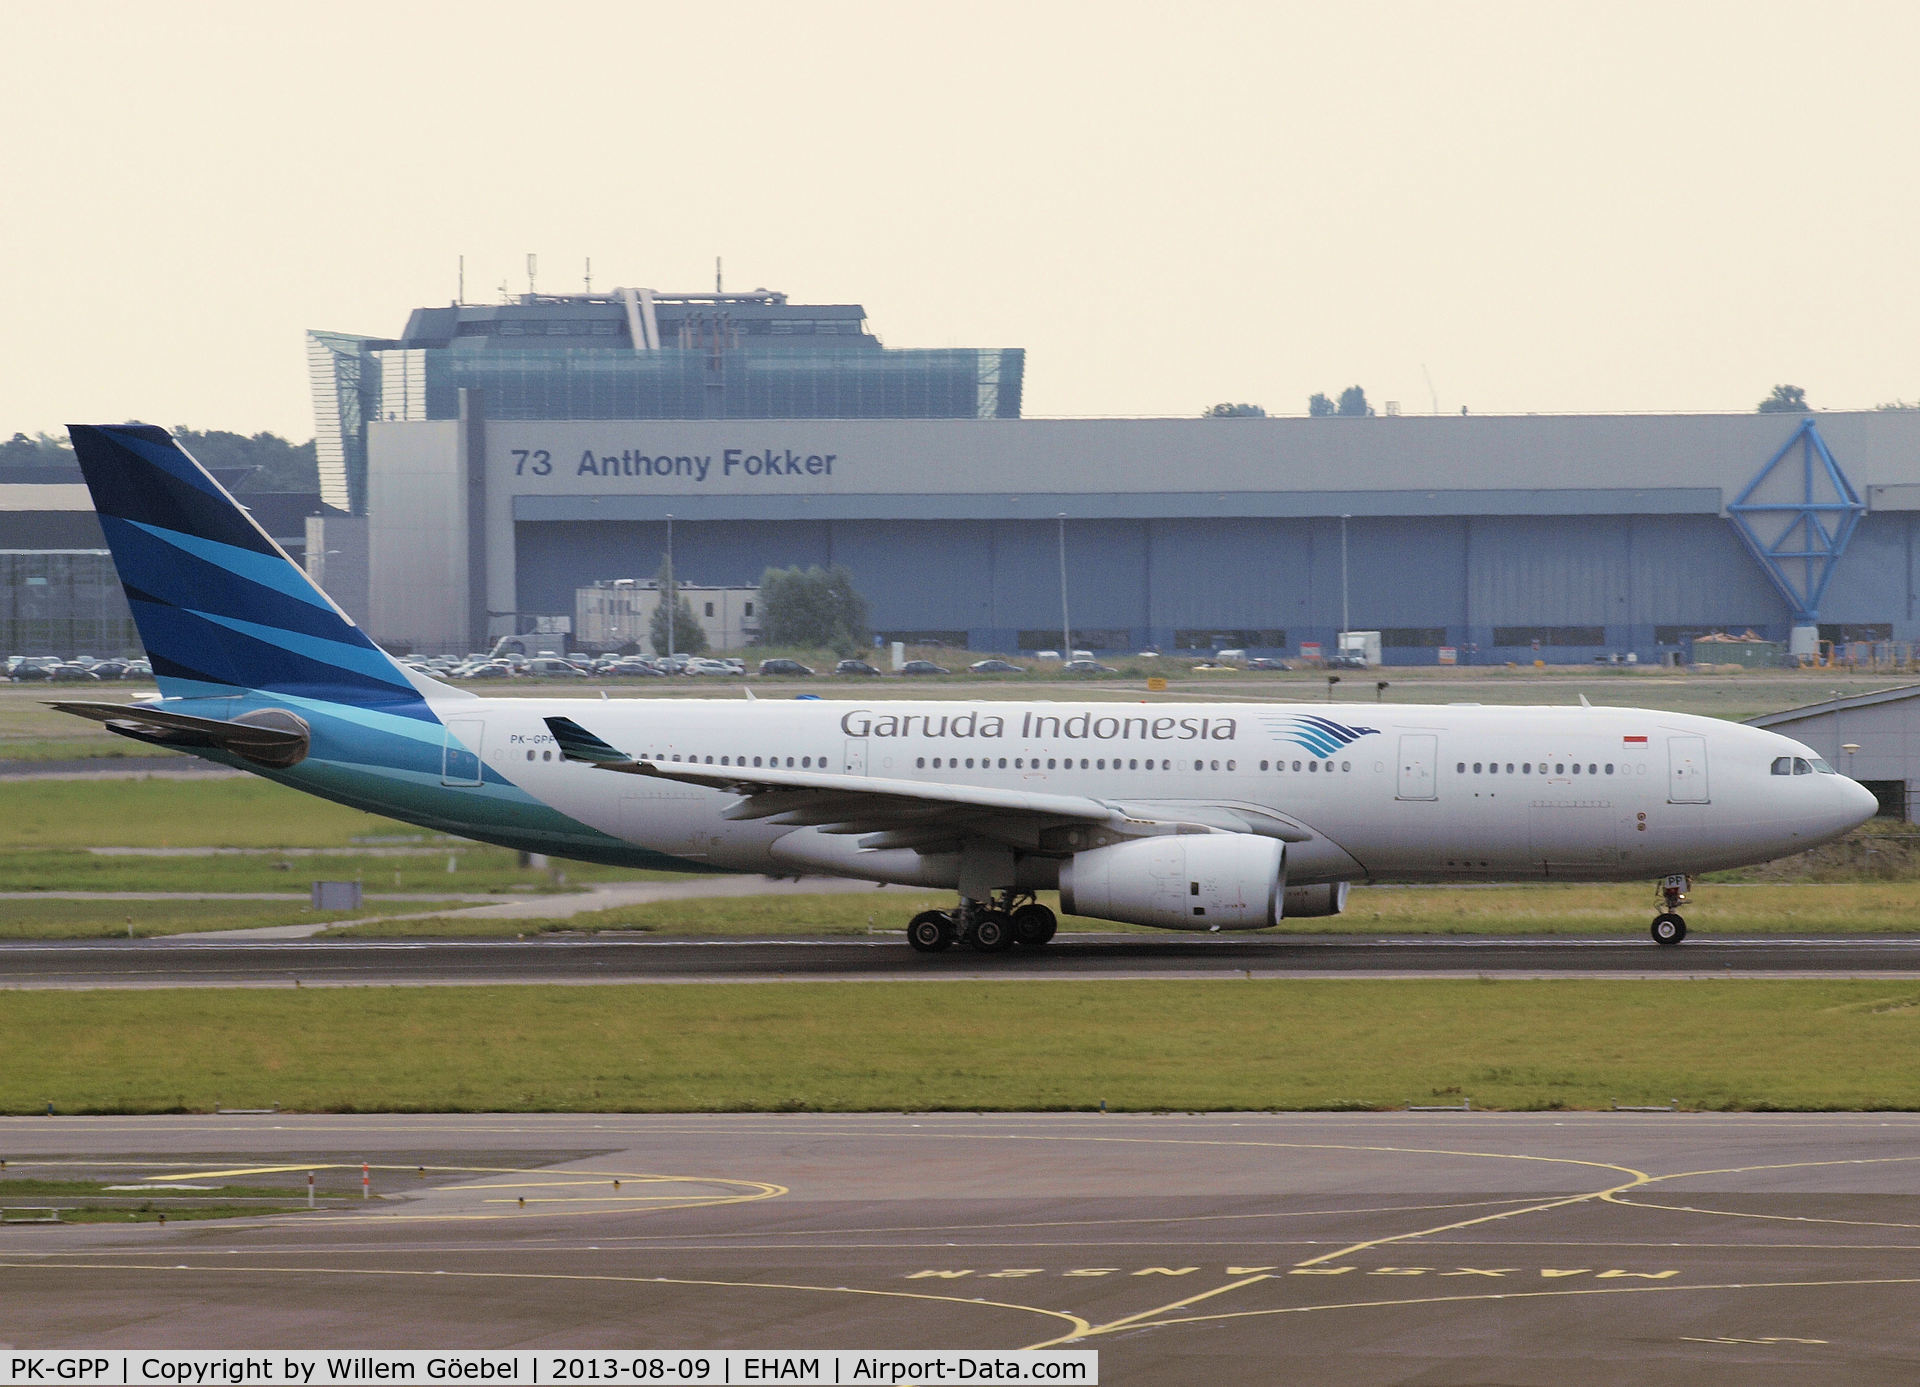 PK-GPP, 2012 Airbus A330-243 C/N 1364, Taxi to runway 27 of Schiphol Airport